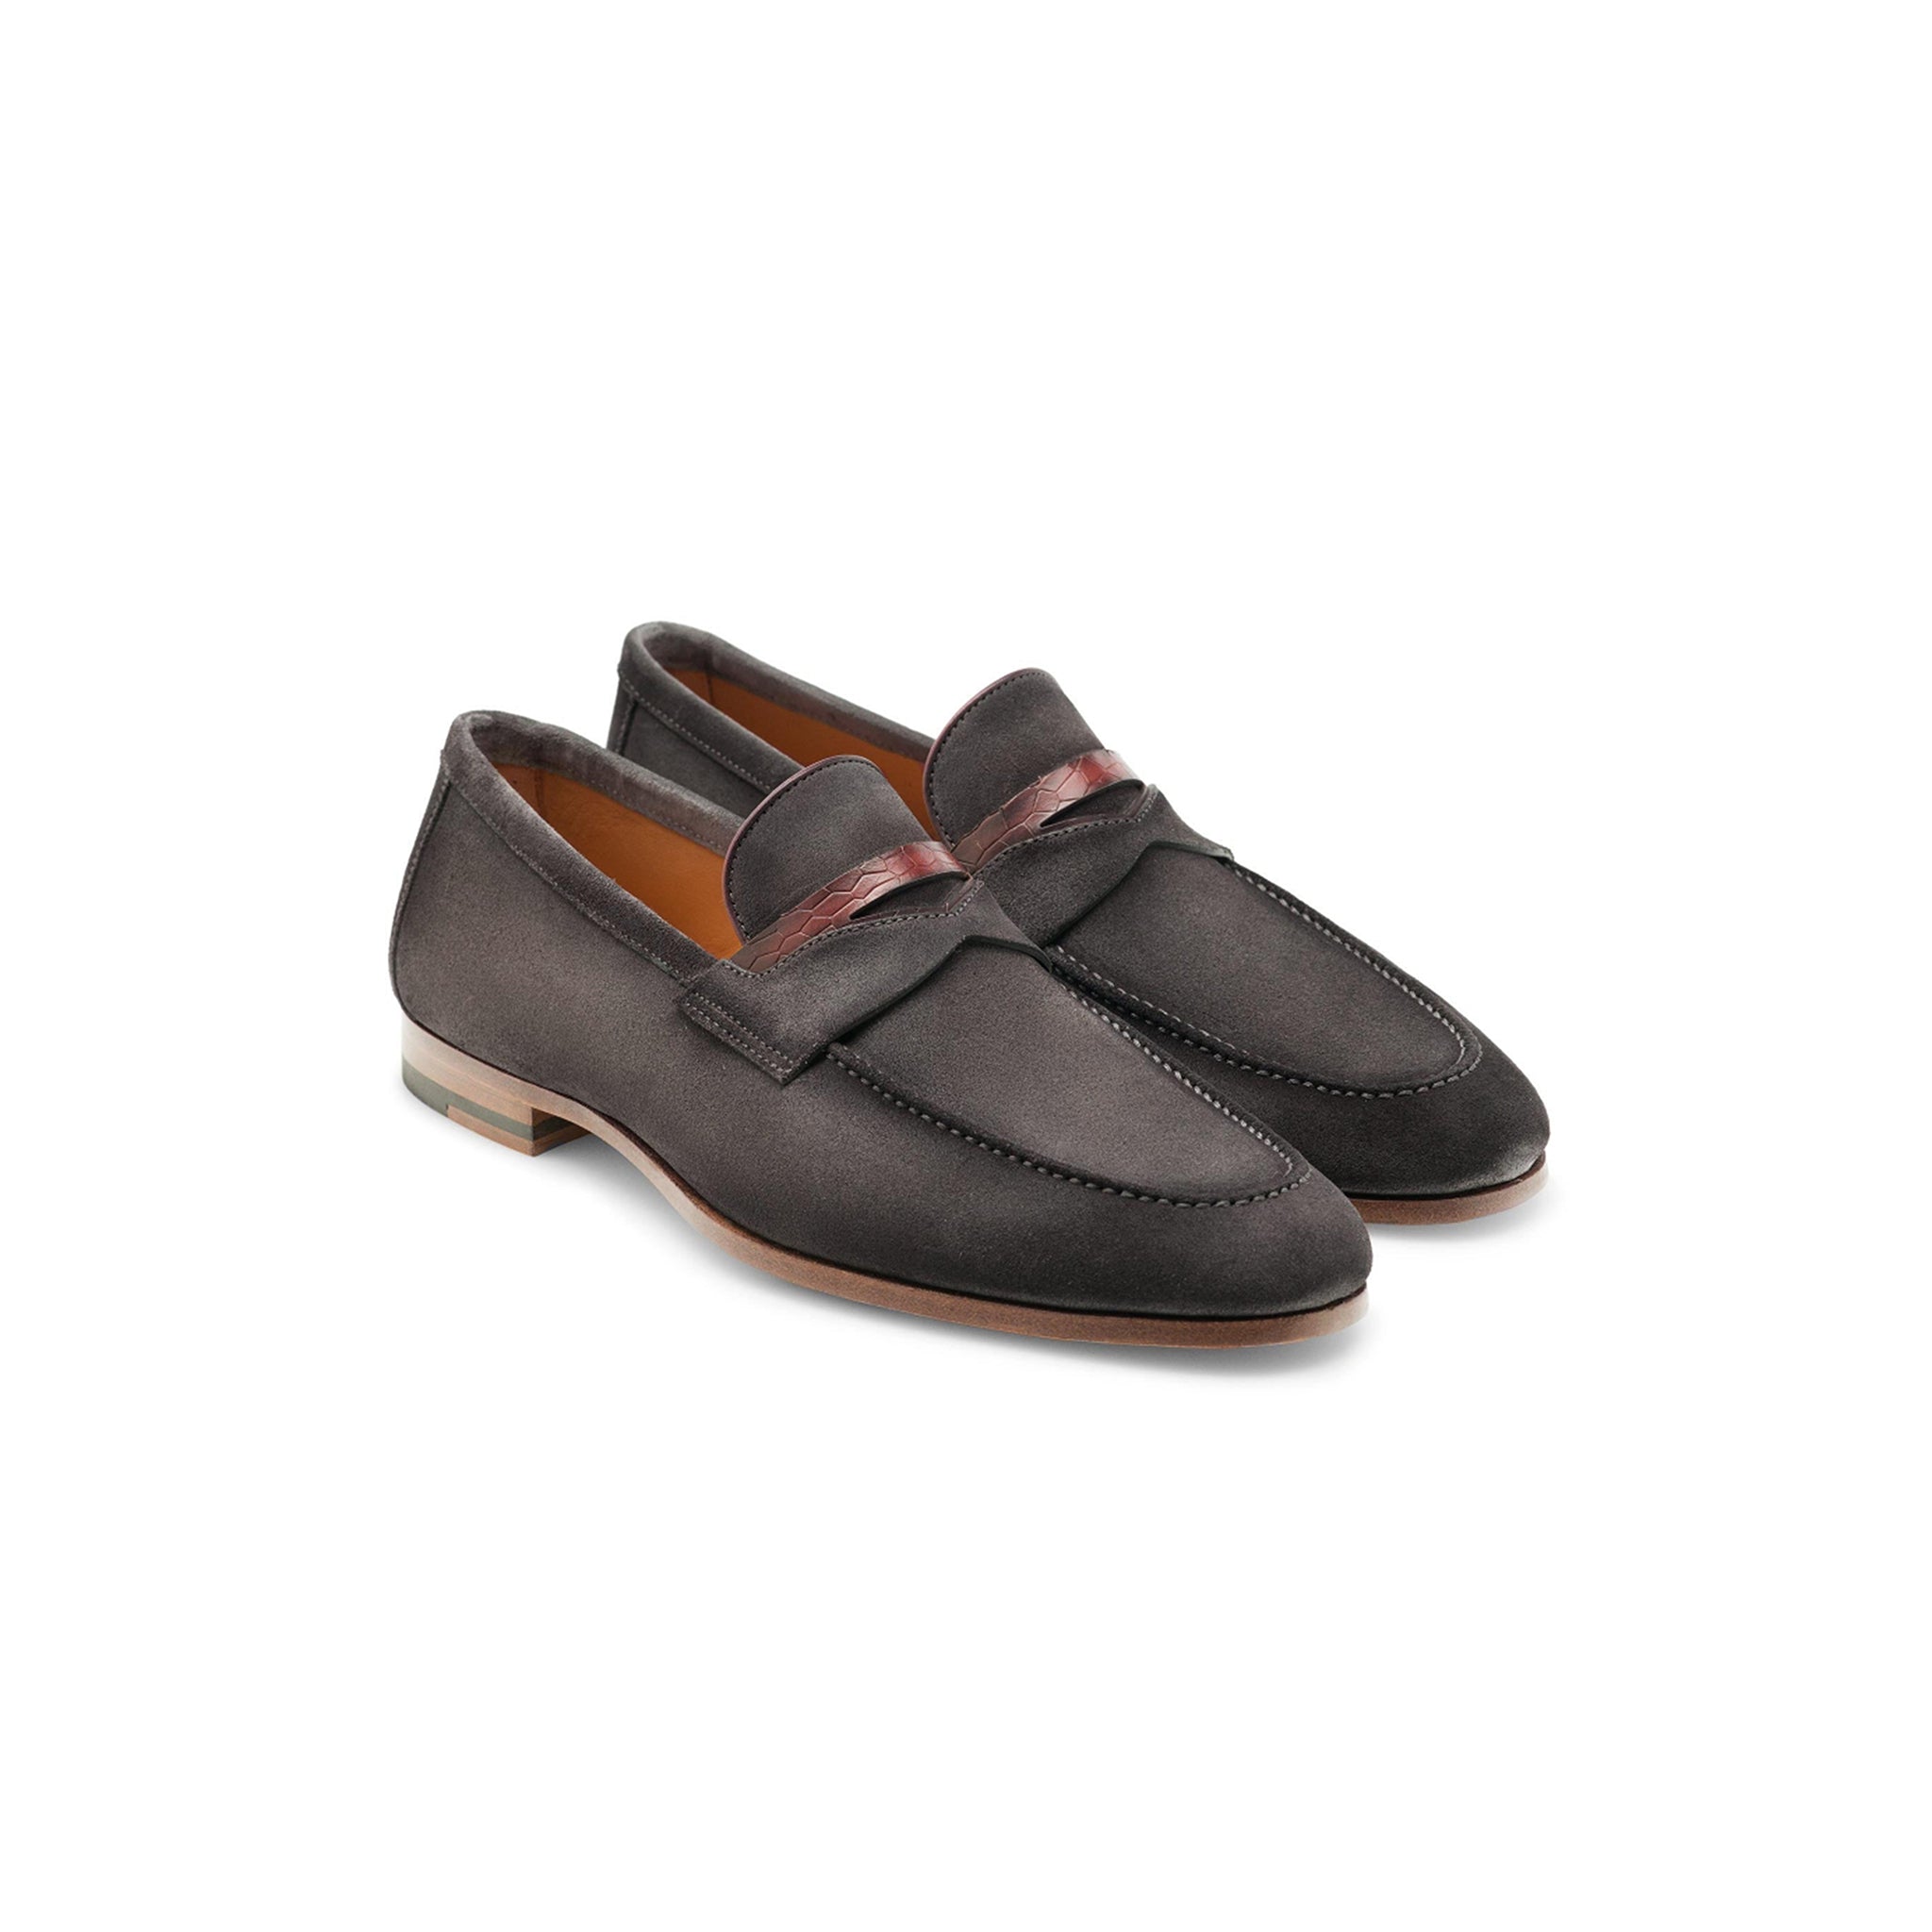 Sasso Utilizes Classic Penny Loafer